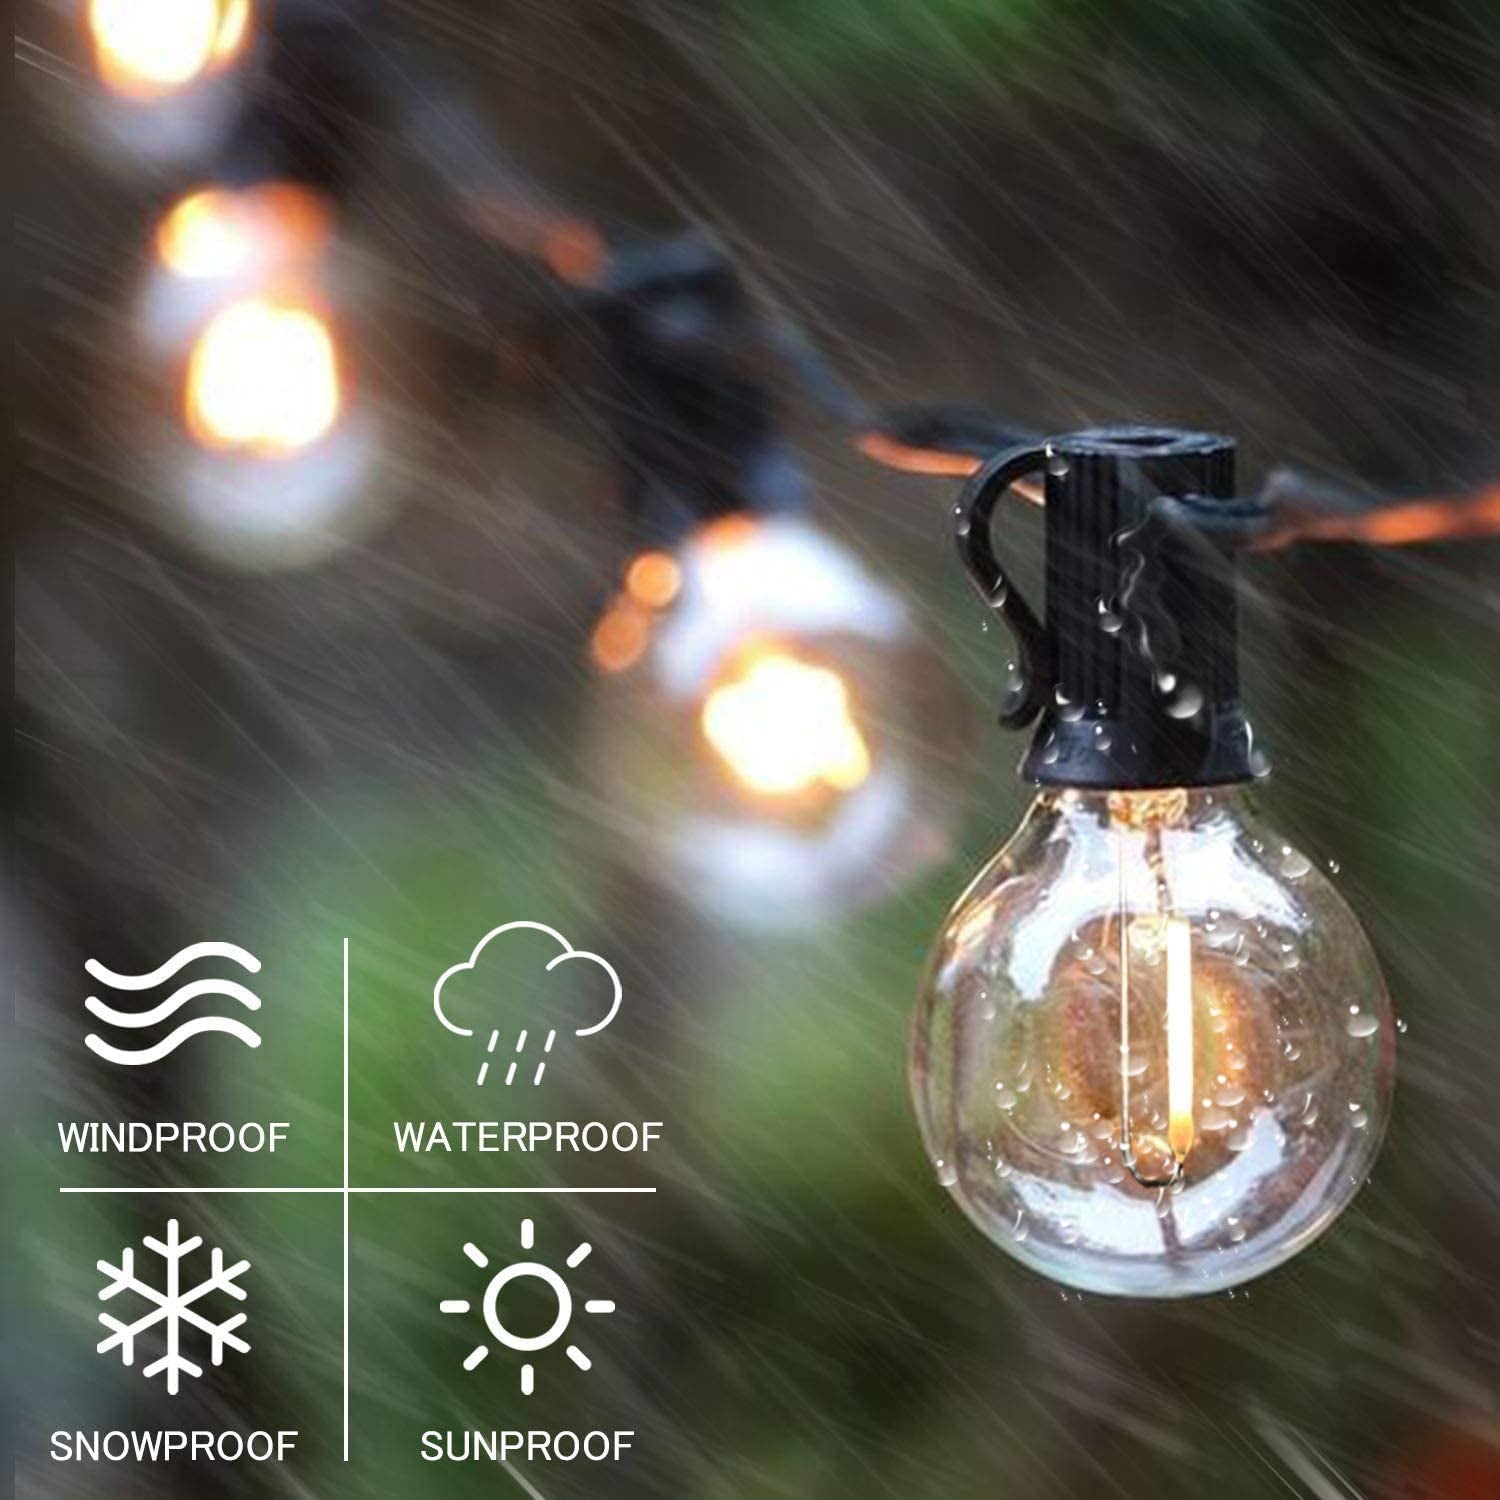 Globe Outdoor String Lights, 27FT Patio Lights with 14 G40 Shatterproof LED Bulbs(1 Spare), Waterproof 